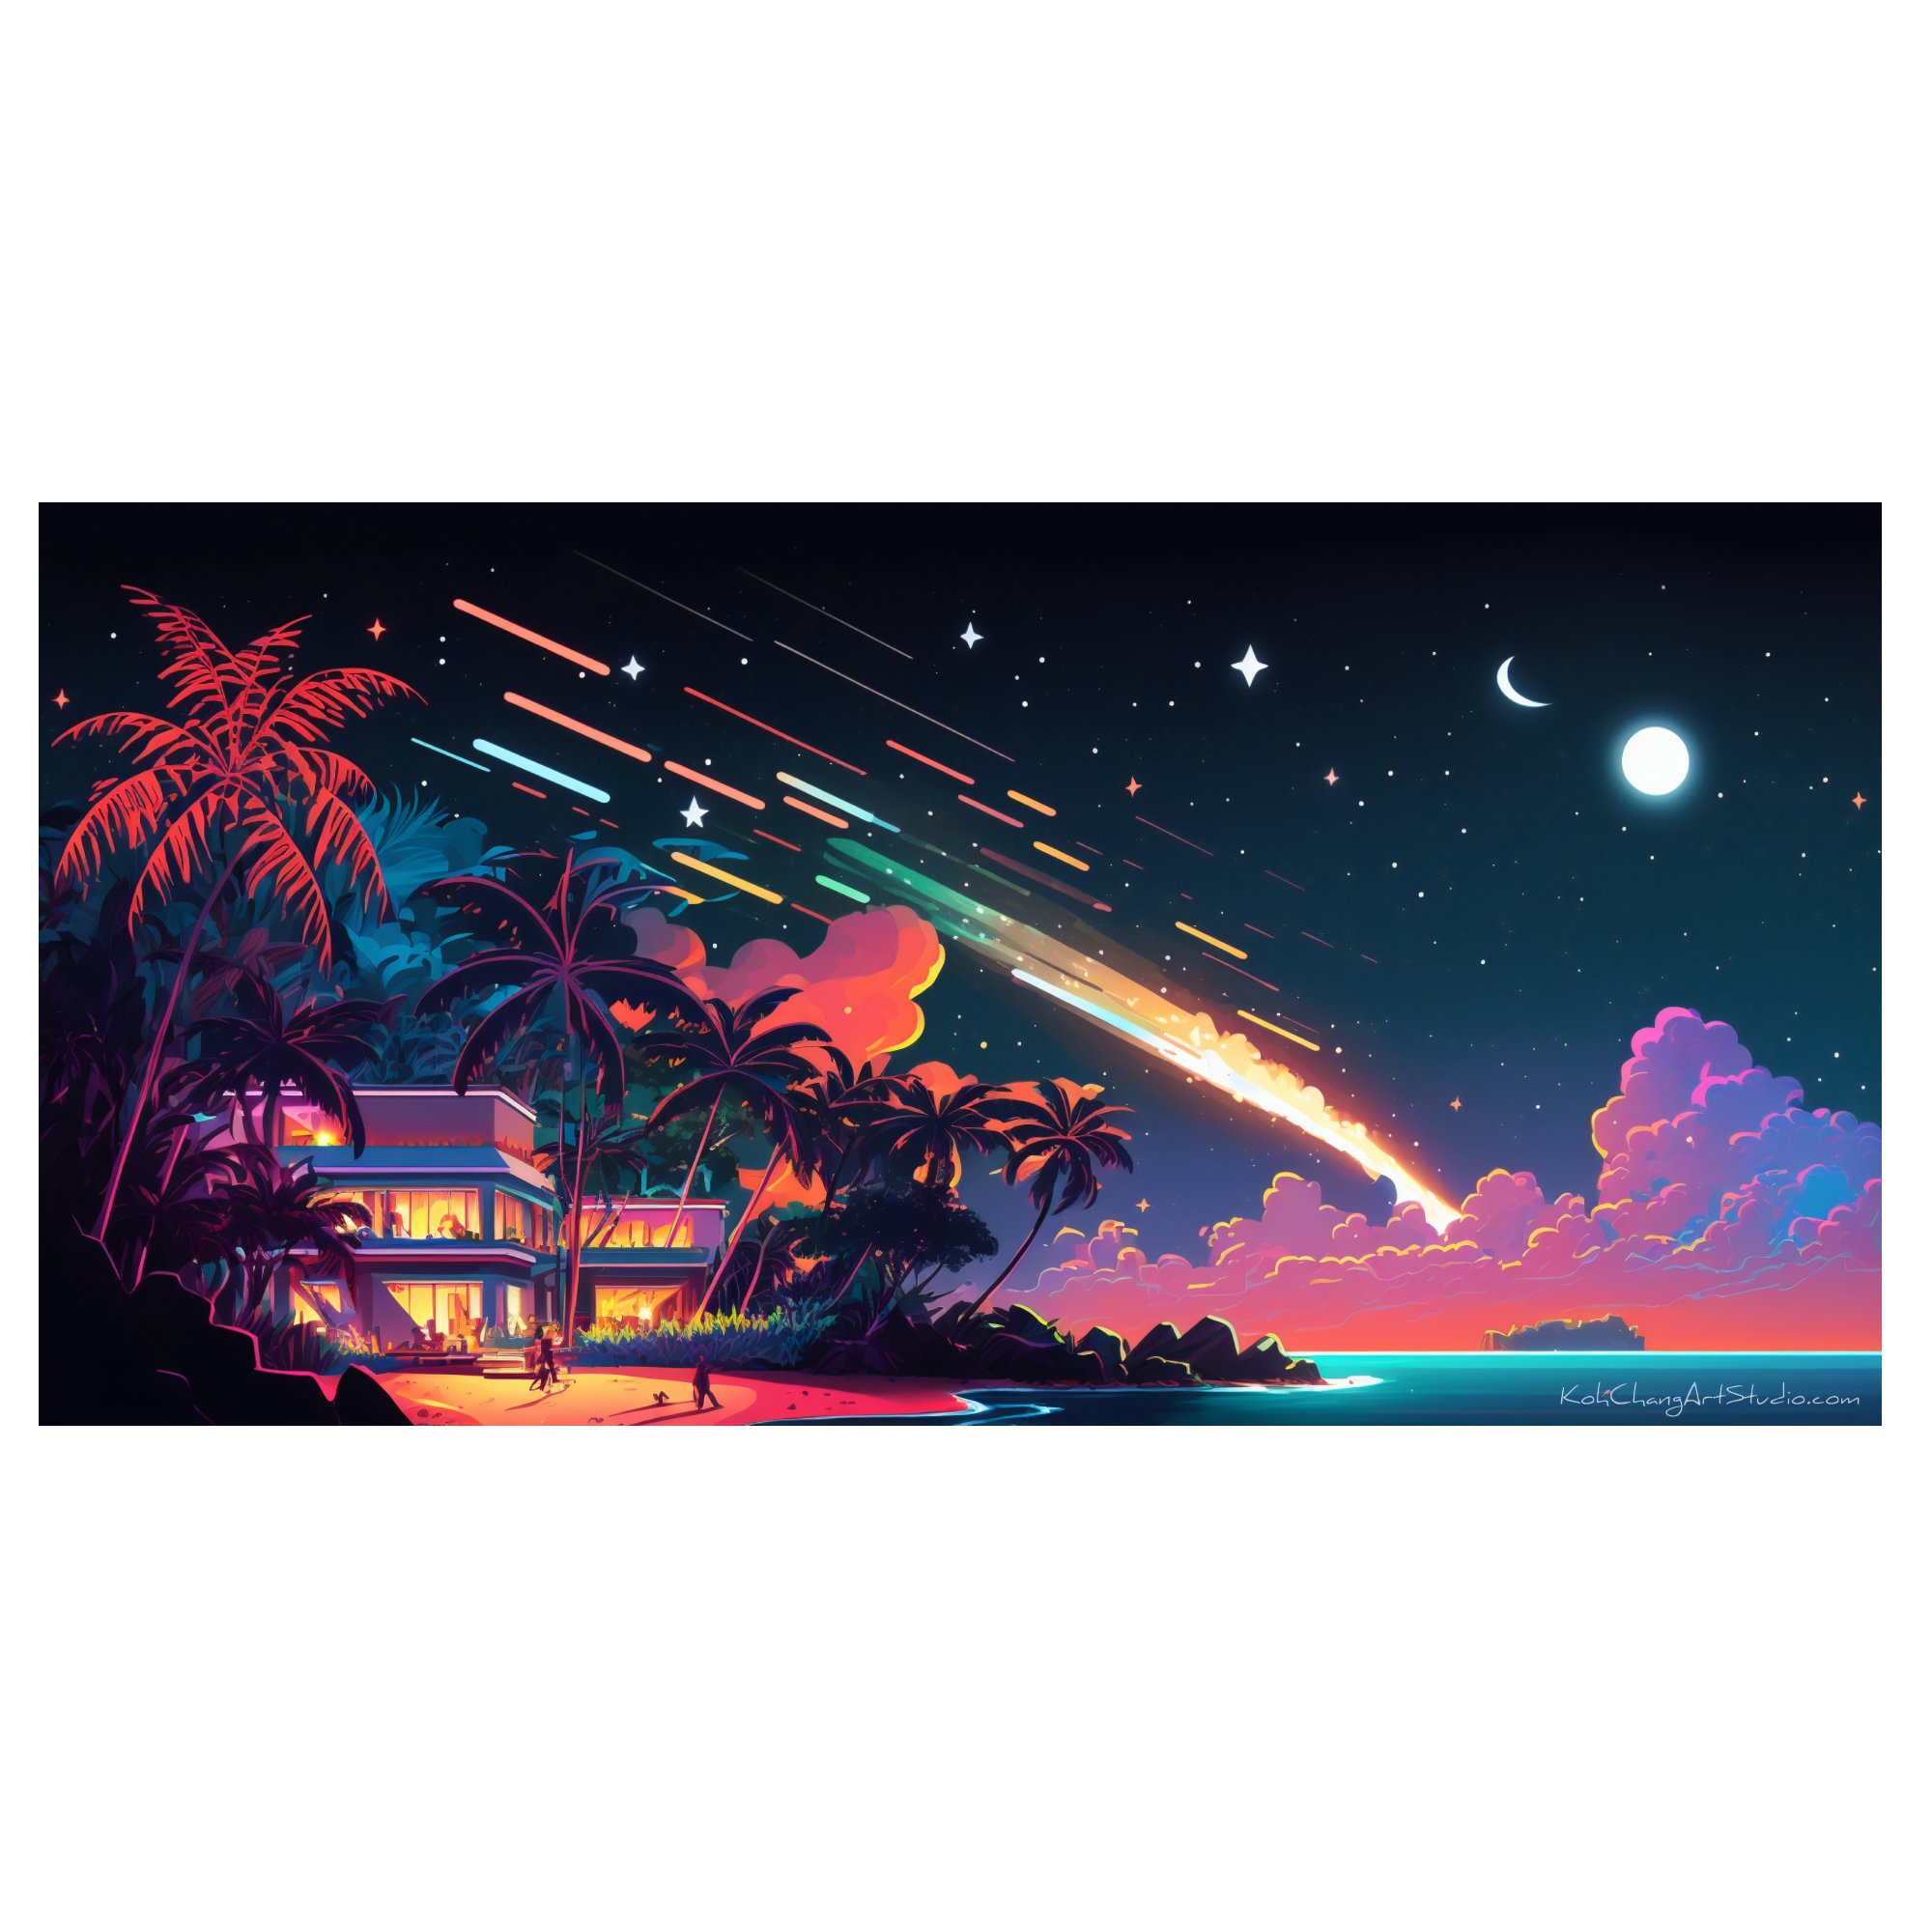 COSMIC POP-CORN Art Expression - Quiet shore under a starry night with a grand shooting star and distant moon.